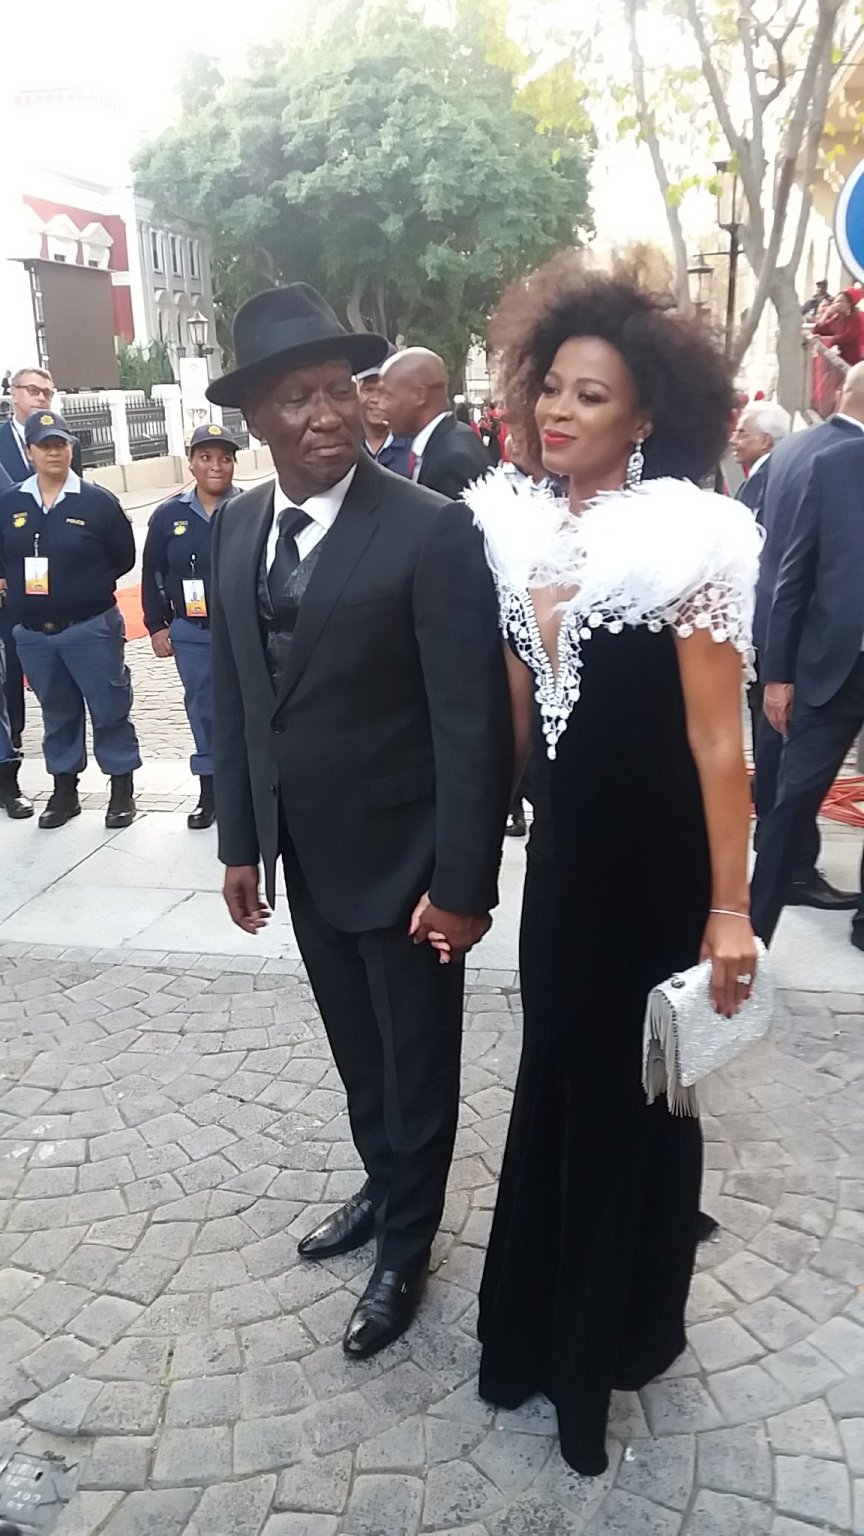 Everything you need to know about Bheki Cele’s wife Thembeka Ngcobo